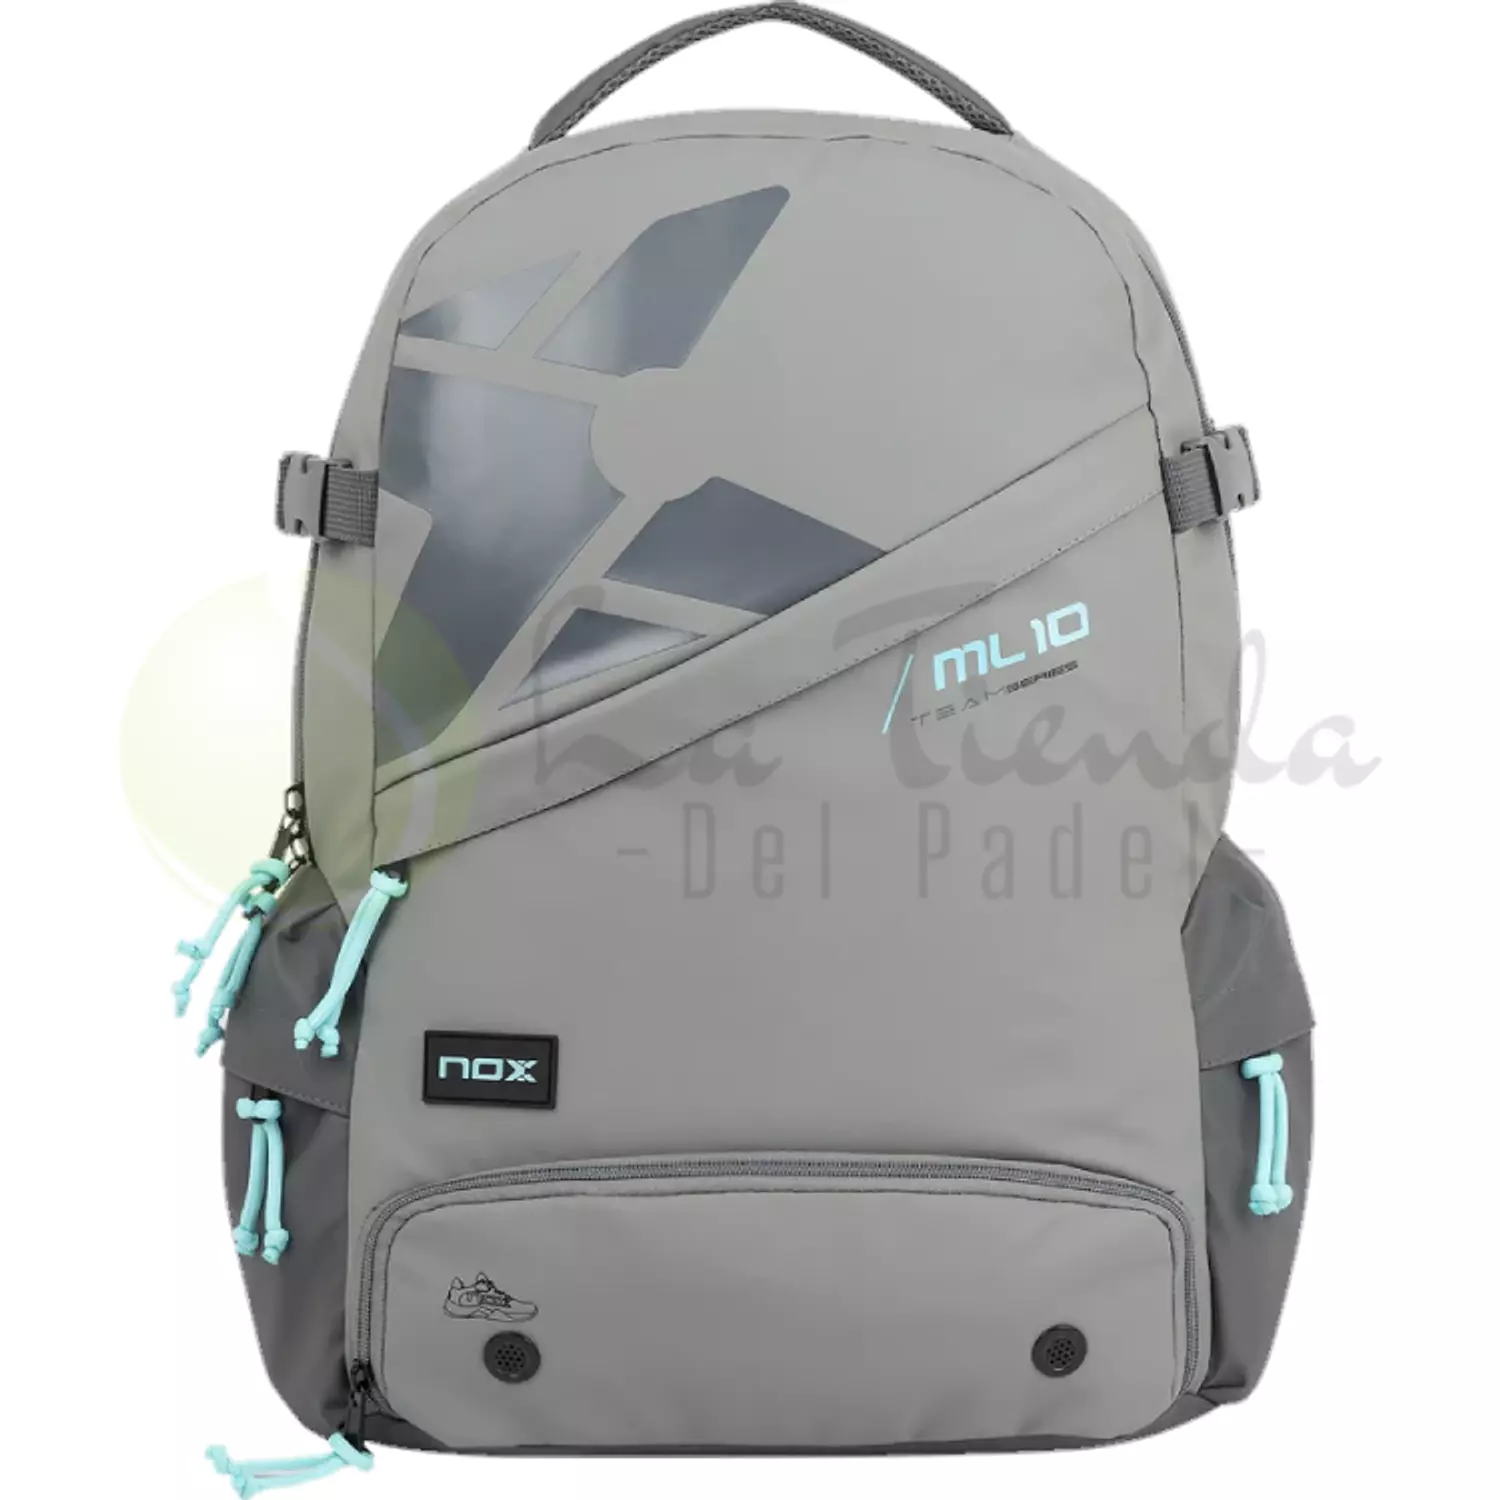 Nox ML10 Team Backpack Gray/Blue hover image